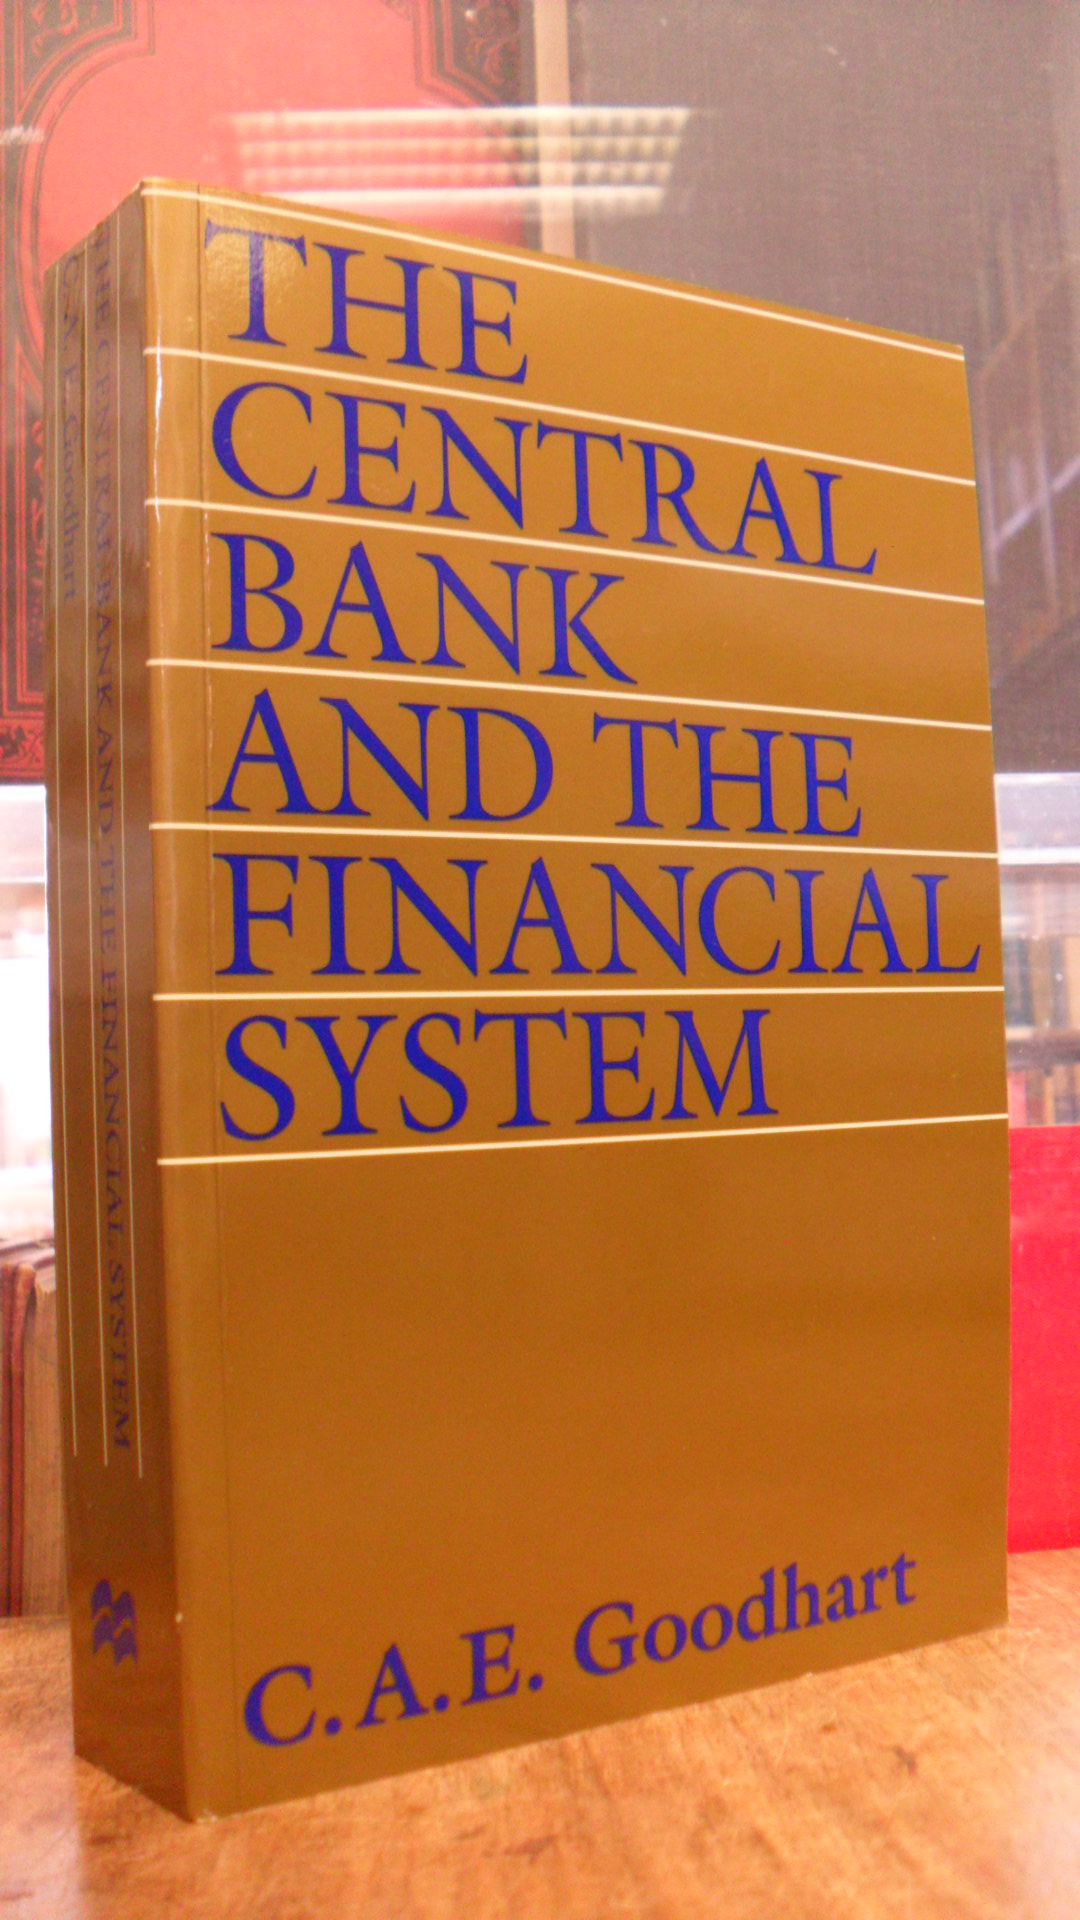 Goodhart, The Central Bank and the Financial System,